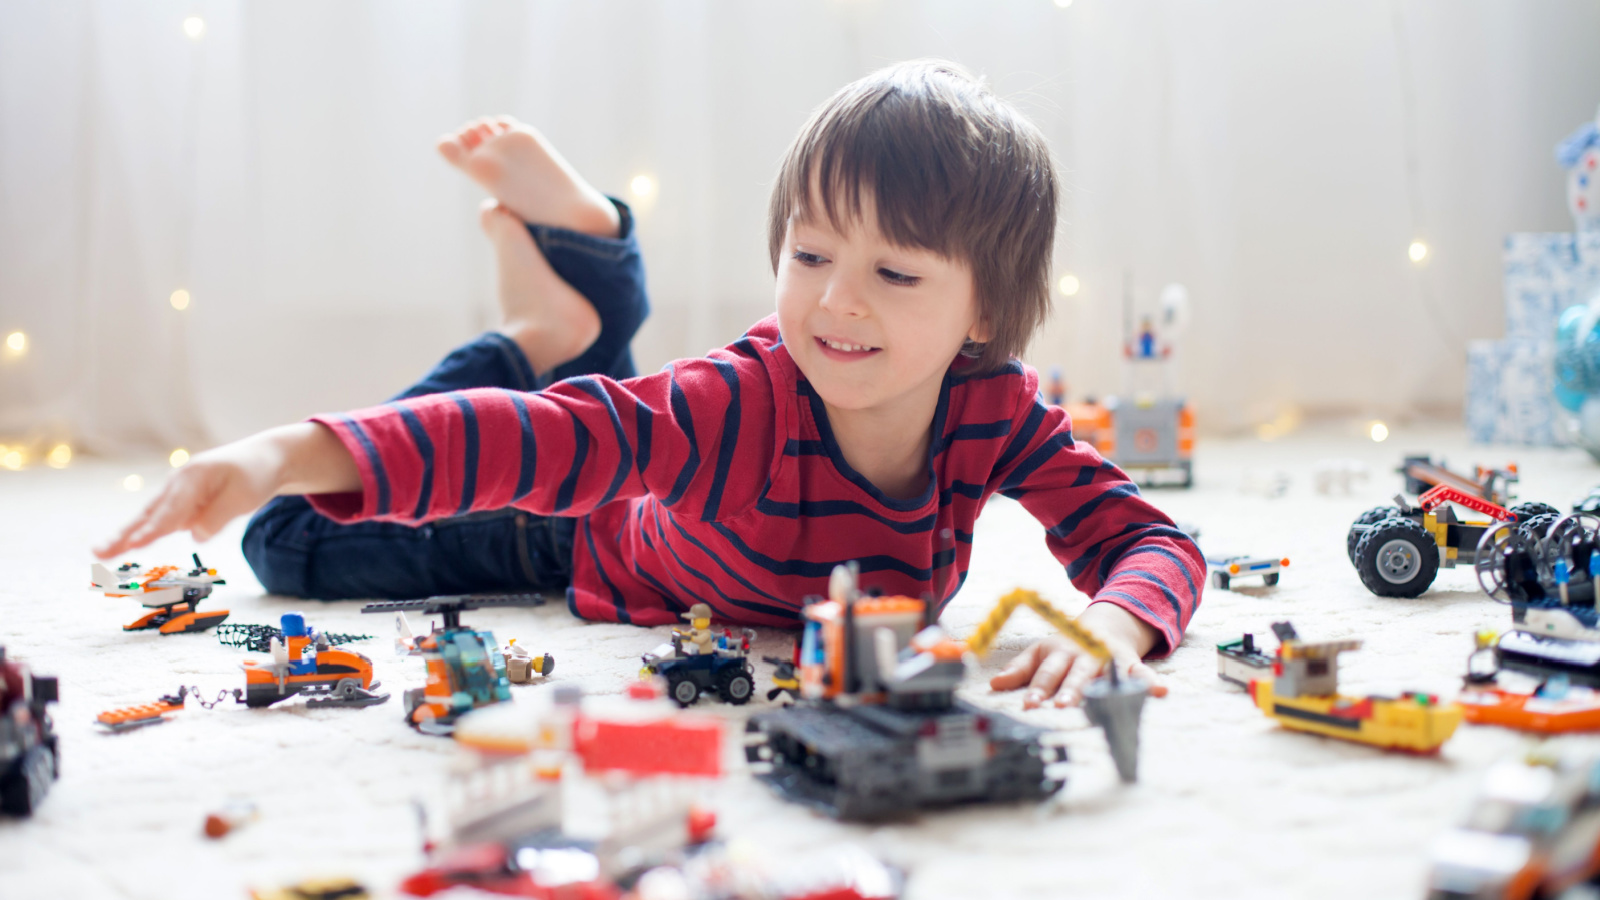 image credit: Tomsickova Tatyana/Shutterstock <p><span>Utilize building blocks or LEGO to let children create their own cities, spaceships, or fantasy lands. This hands-on activity enhances spatial awareness and problem-solving skills. As they build, encourage them to narrate stories about their creations. It’s a blend of engineering and storytelling, sparking both logical and creative thinking.</span></p>